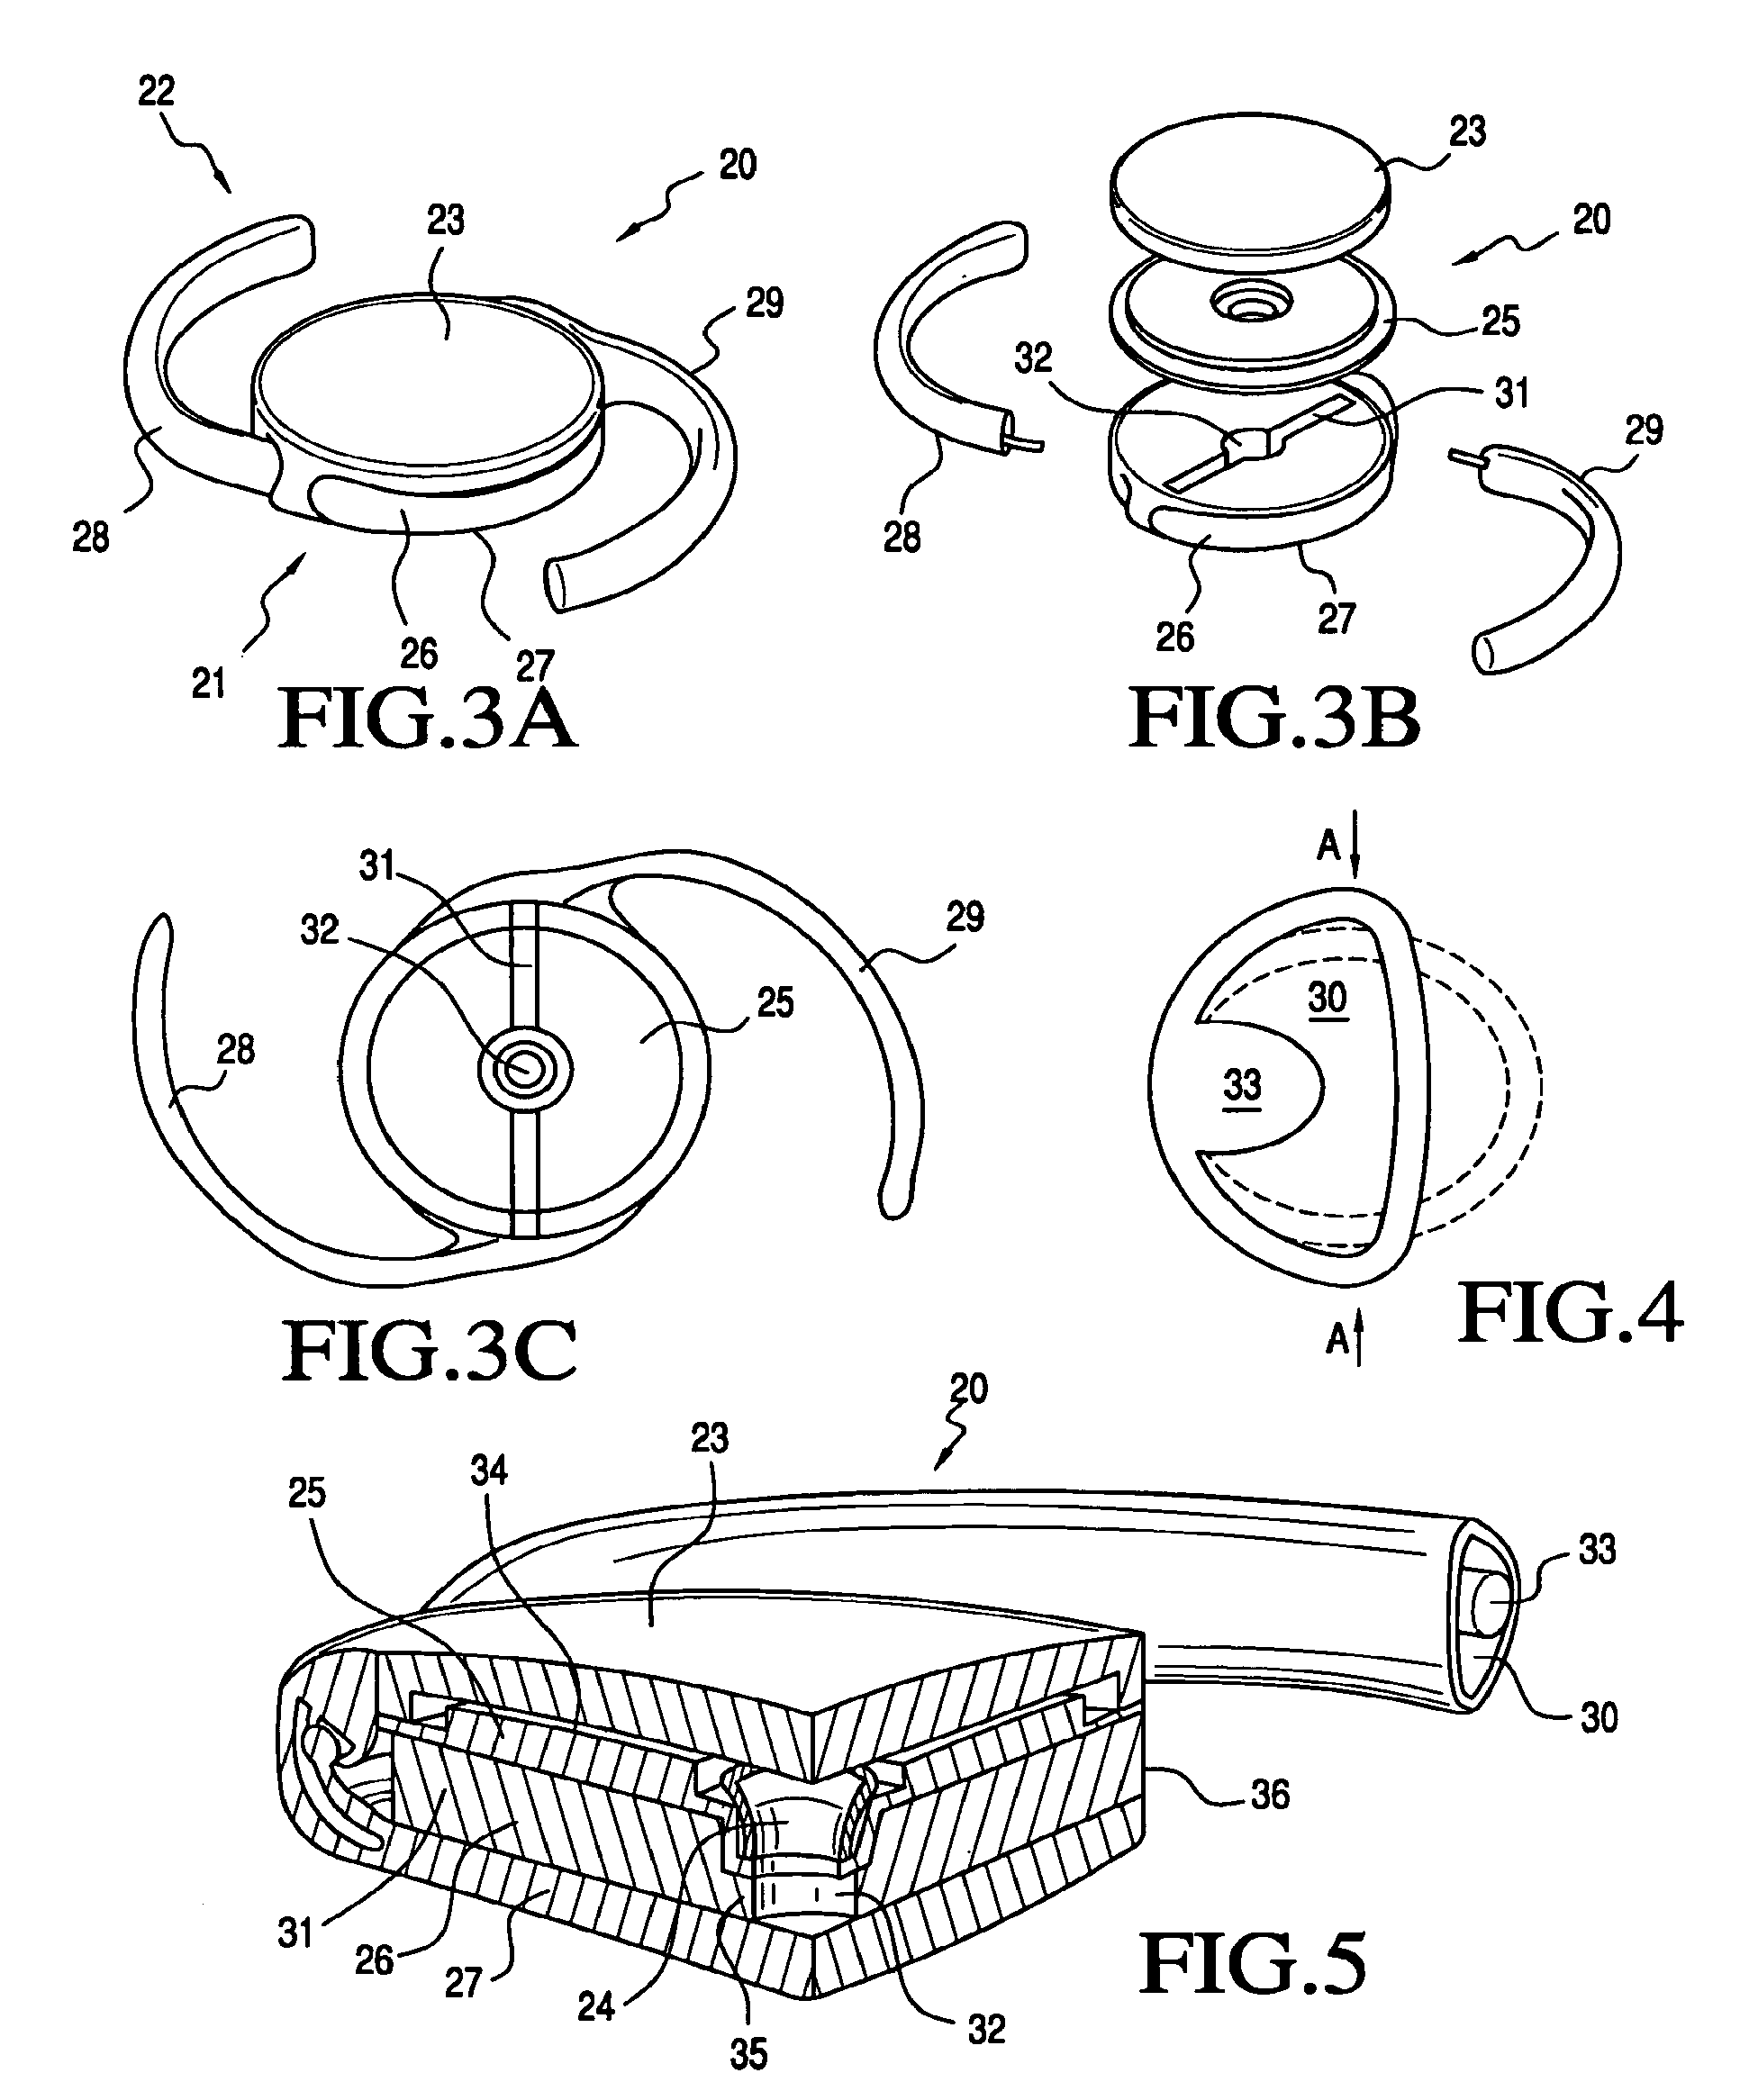 Accommodating intraocular lens system and method